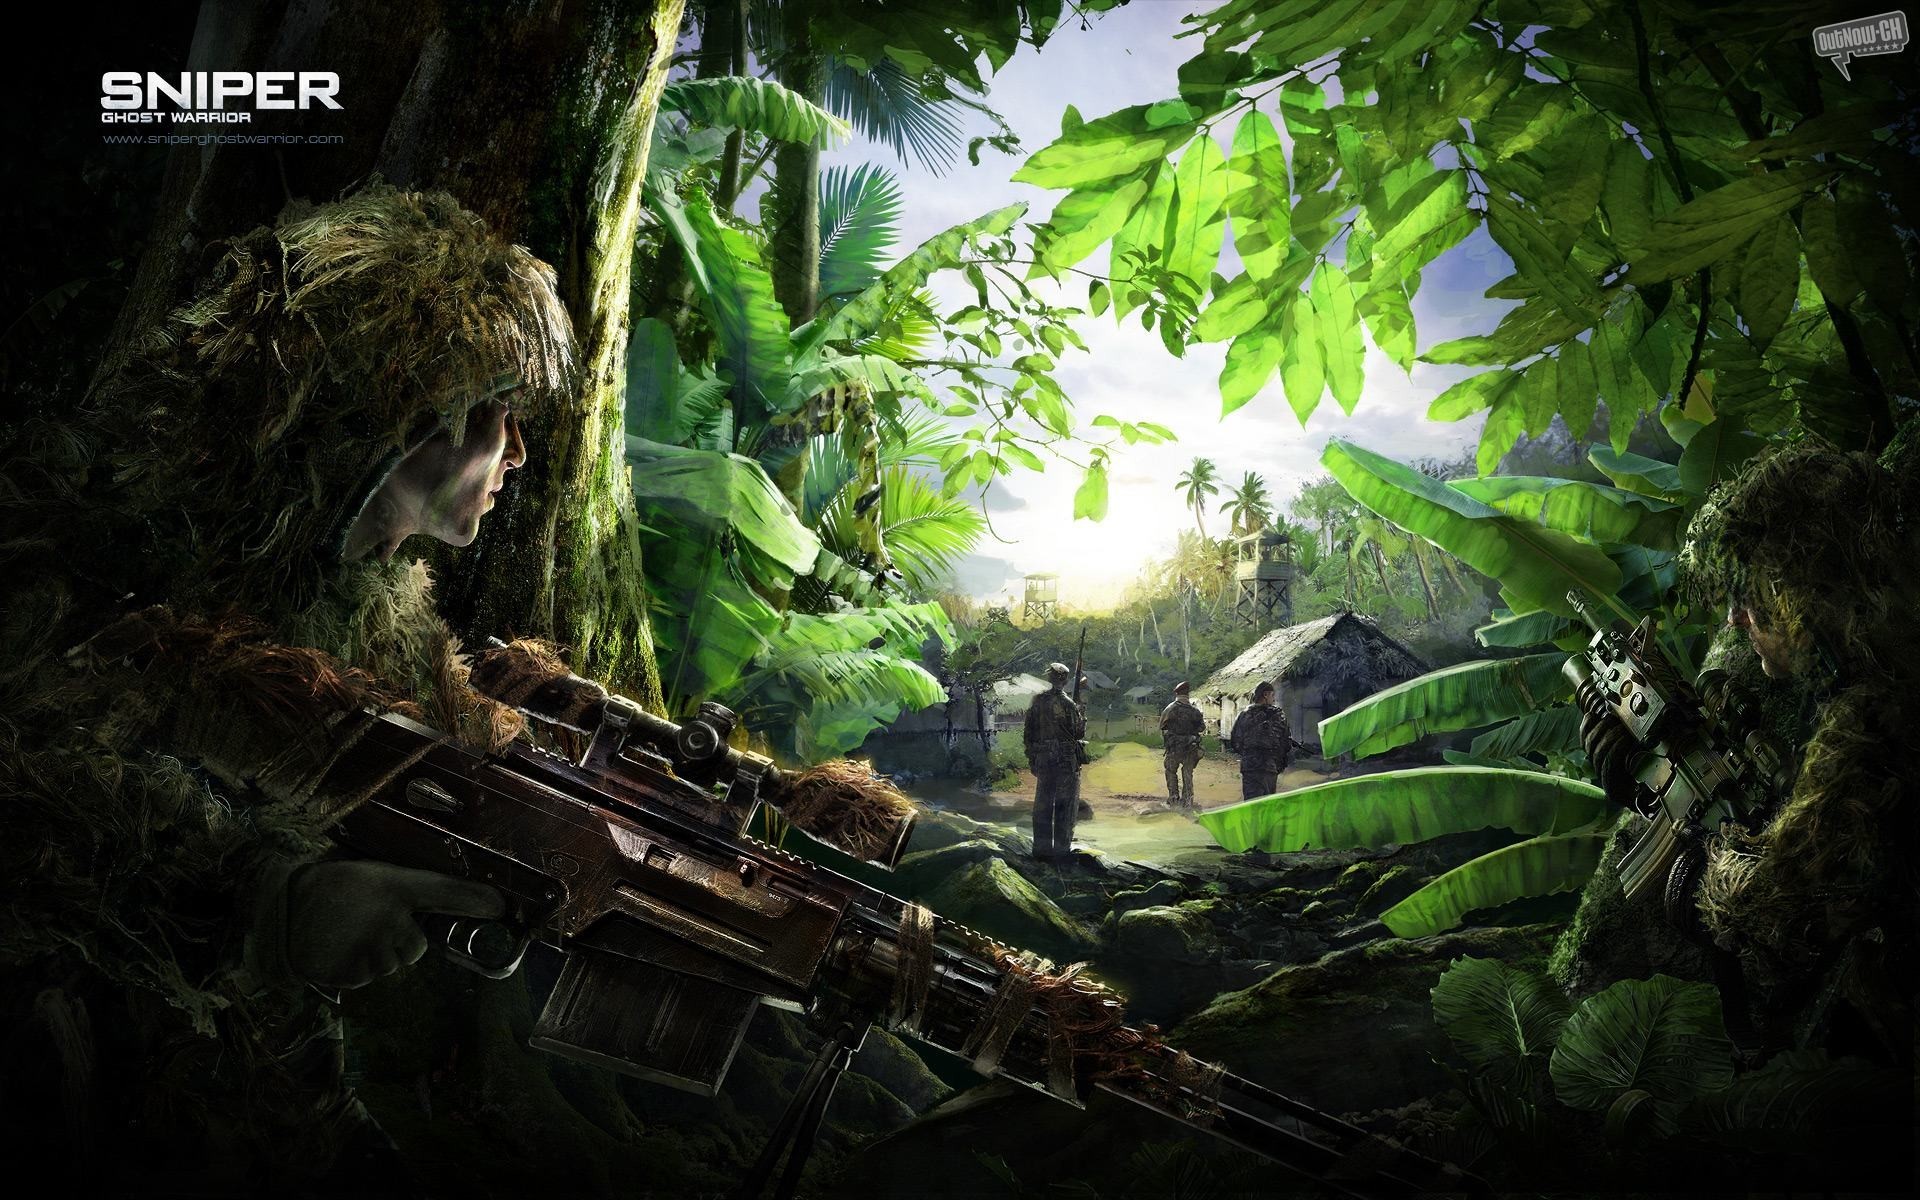 1920x1200  Wallpapers Backgrounds - Military Wallpapers cell phone Russian  Sniper